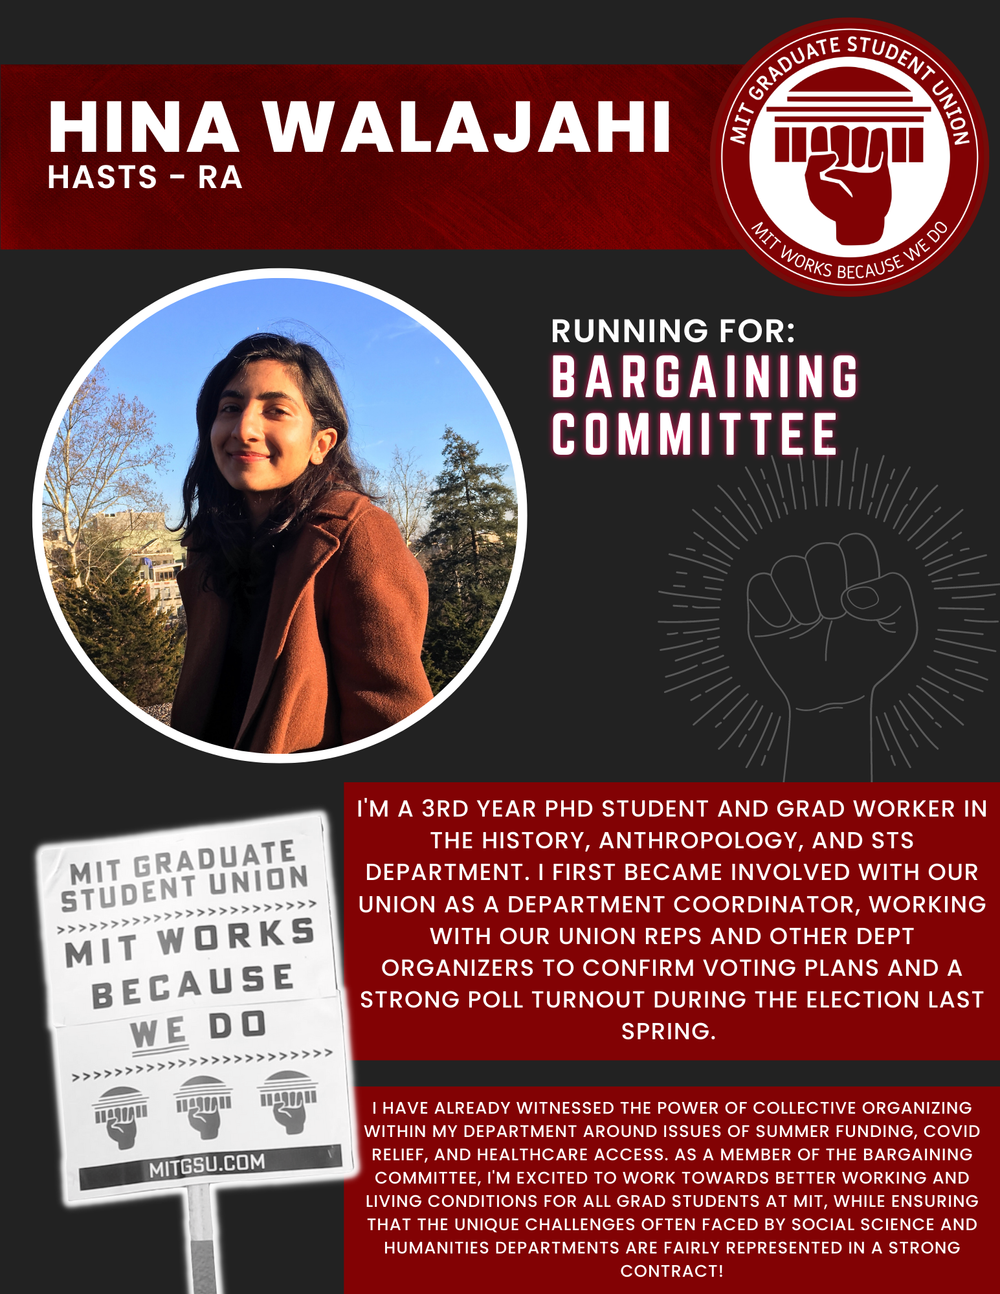  HINA WALAJAHI HASTS - RA   RUNNING FOR:  Bargaining Committee  I'M A 3RD YEAR PHD STUDENT AND GRAD WORKER IN THE HISTORY, ANTHROPOLOGY, AND STS DEPARTMENT. I FIRST BECAME INVOLVED WITH OUR UNION AS A DEPARTMENT COORDINATOR, WORKING WITH OUR UNION RE